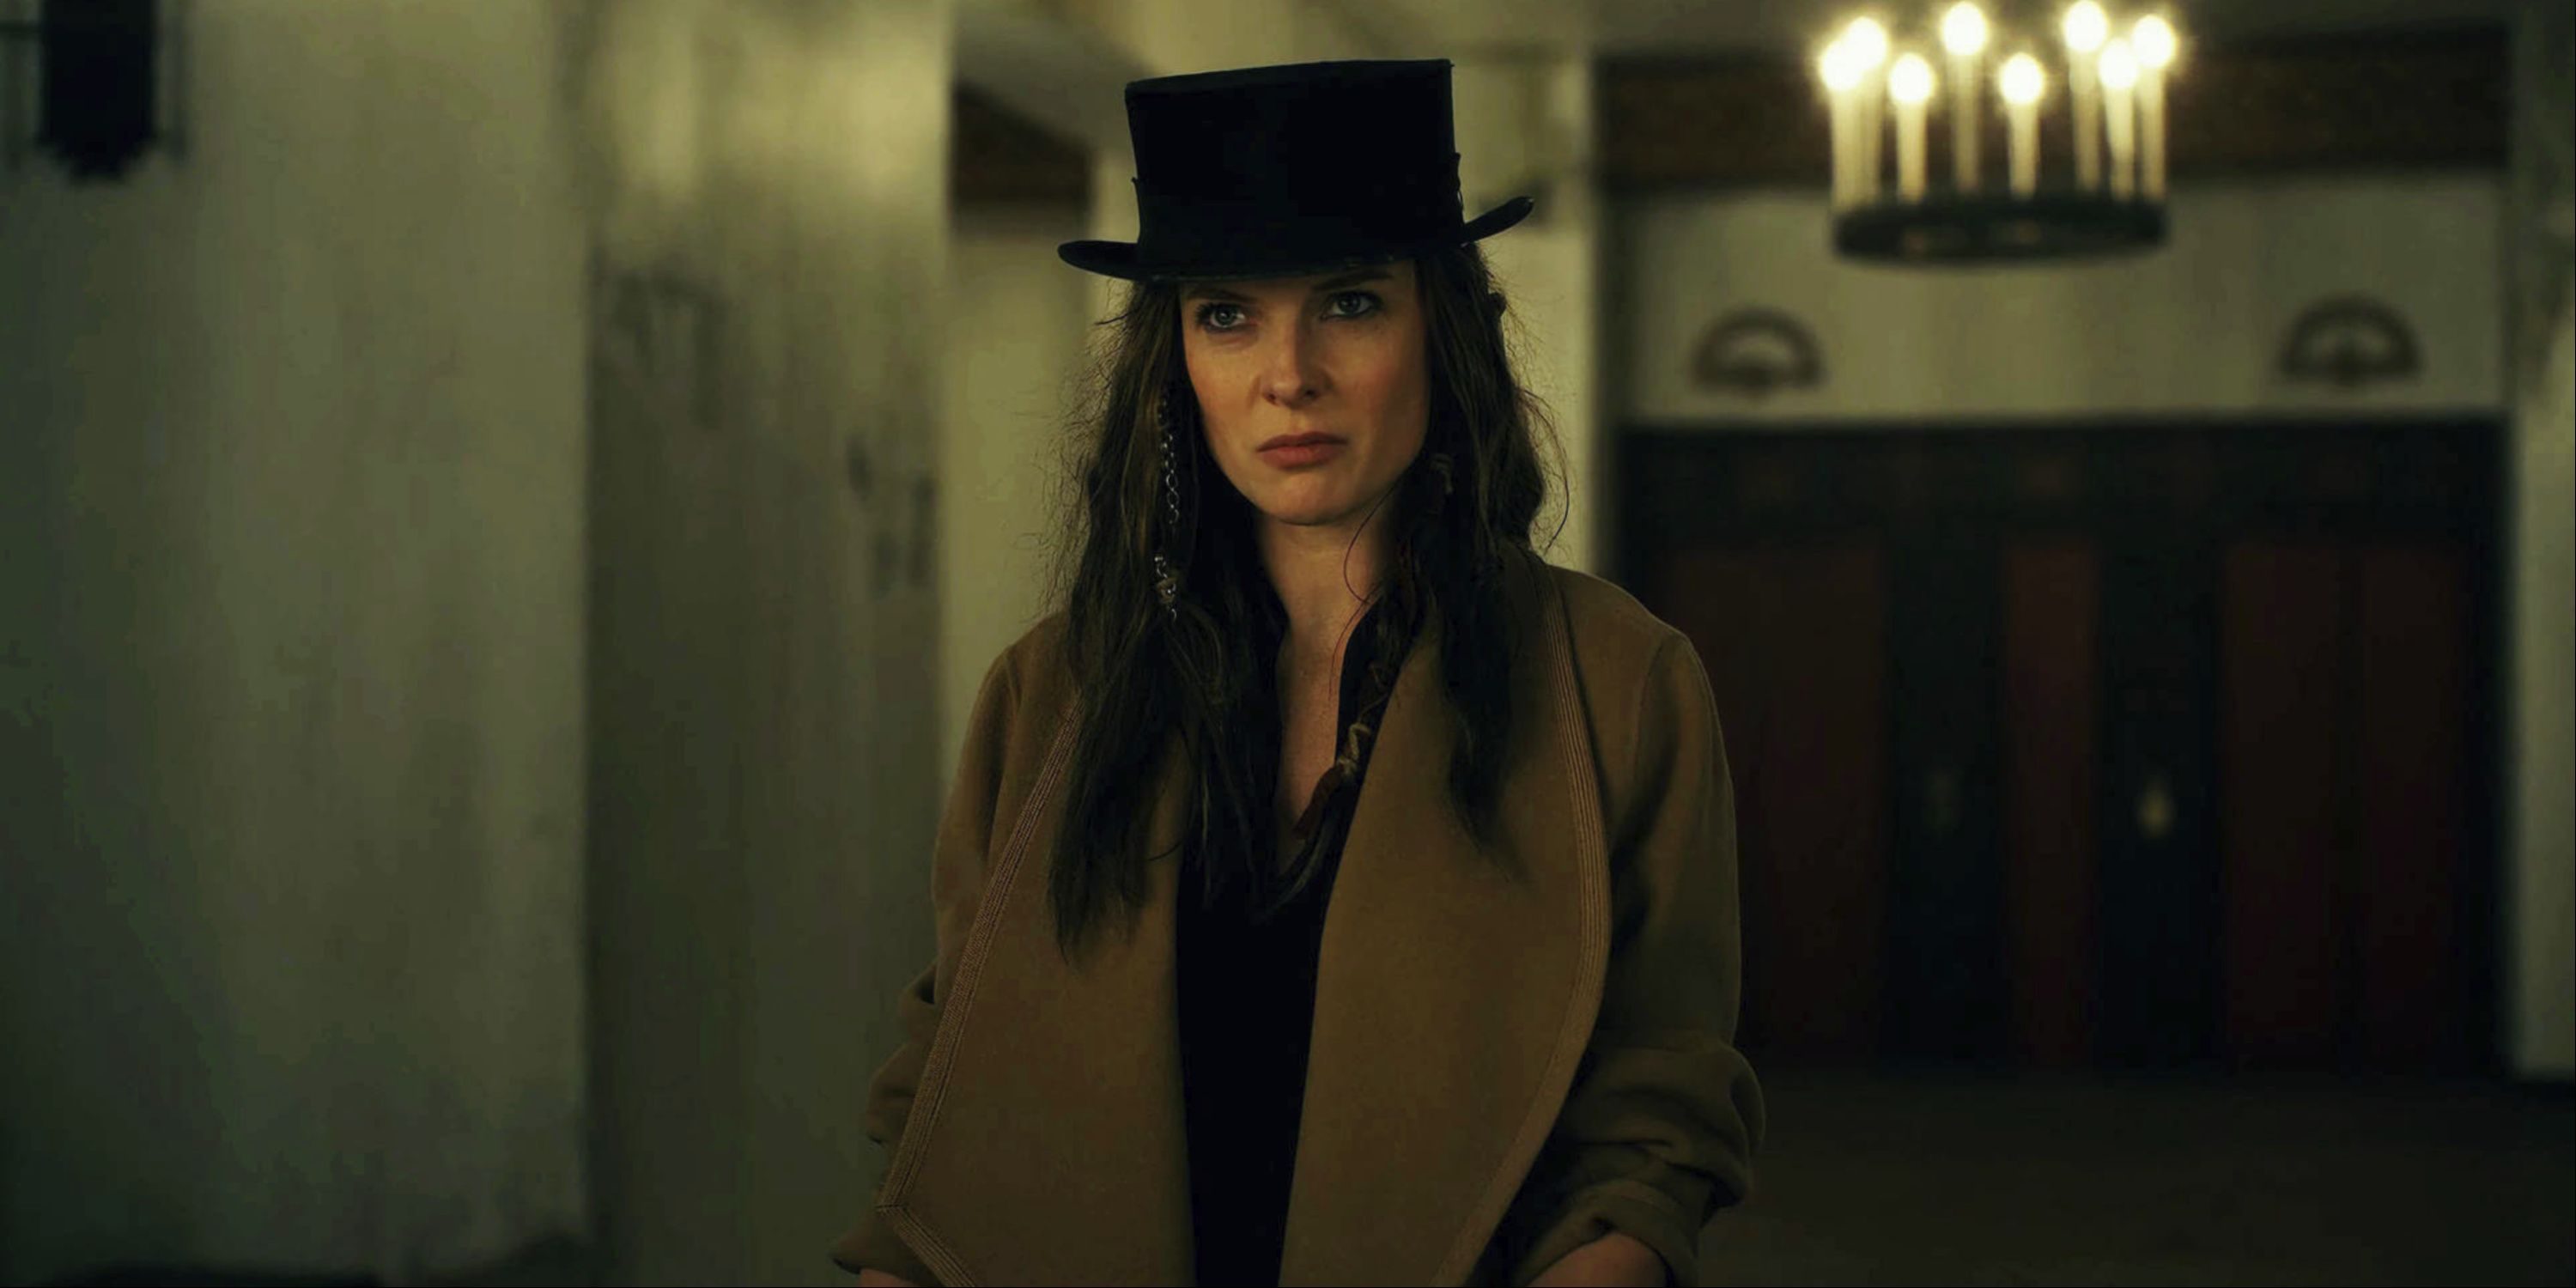 Rebecca Ferguson as Rose the Hat, standing in a dimly lit hallway wearing a brown coat and black top hat in Doctor Sleep